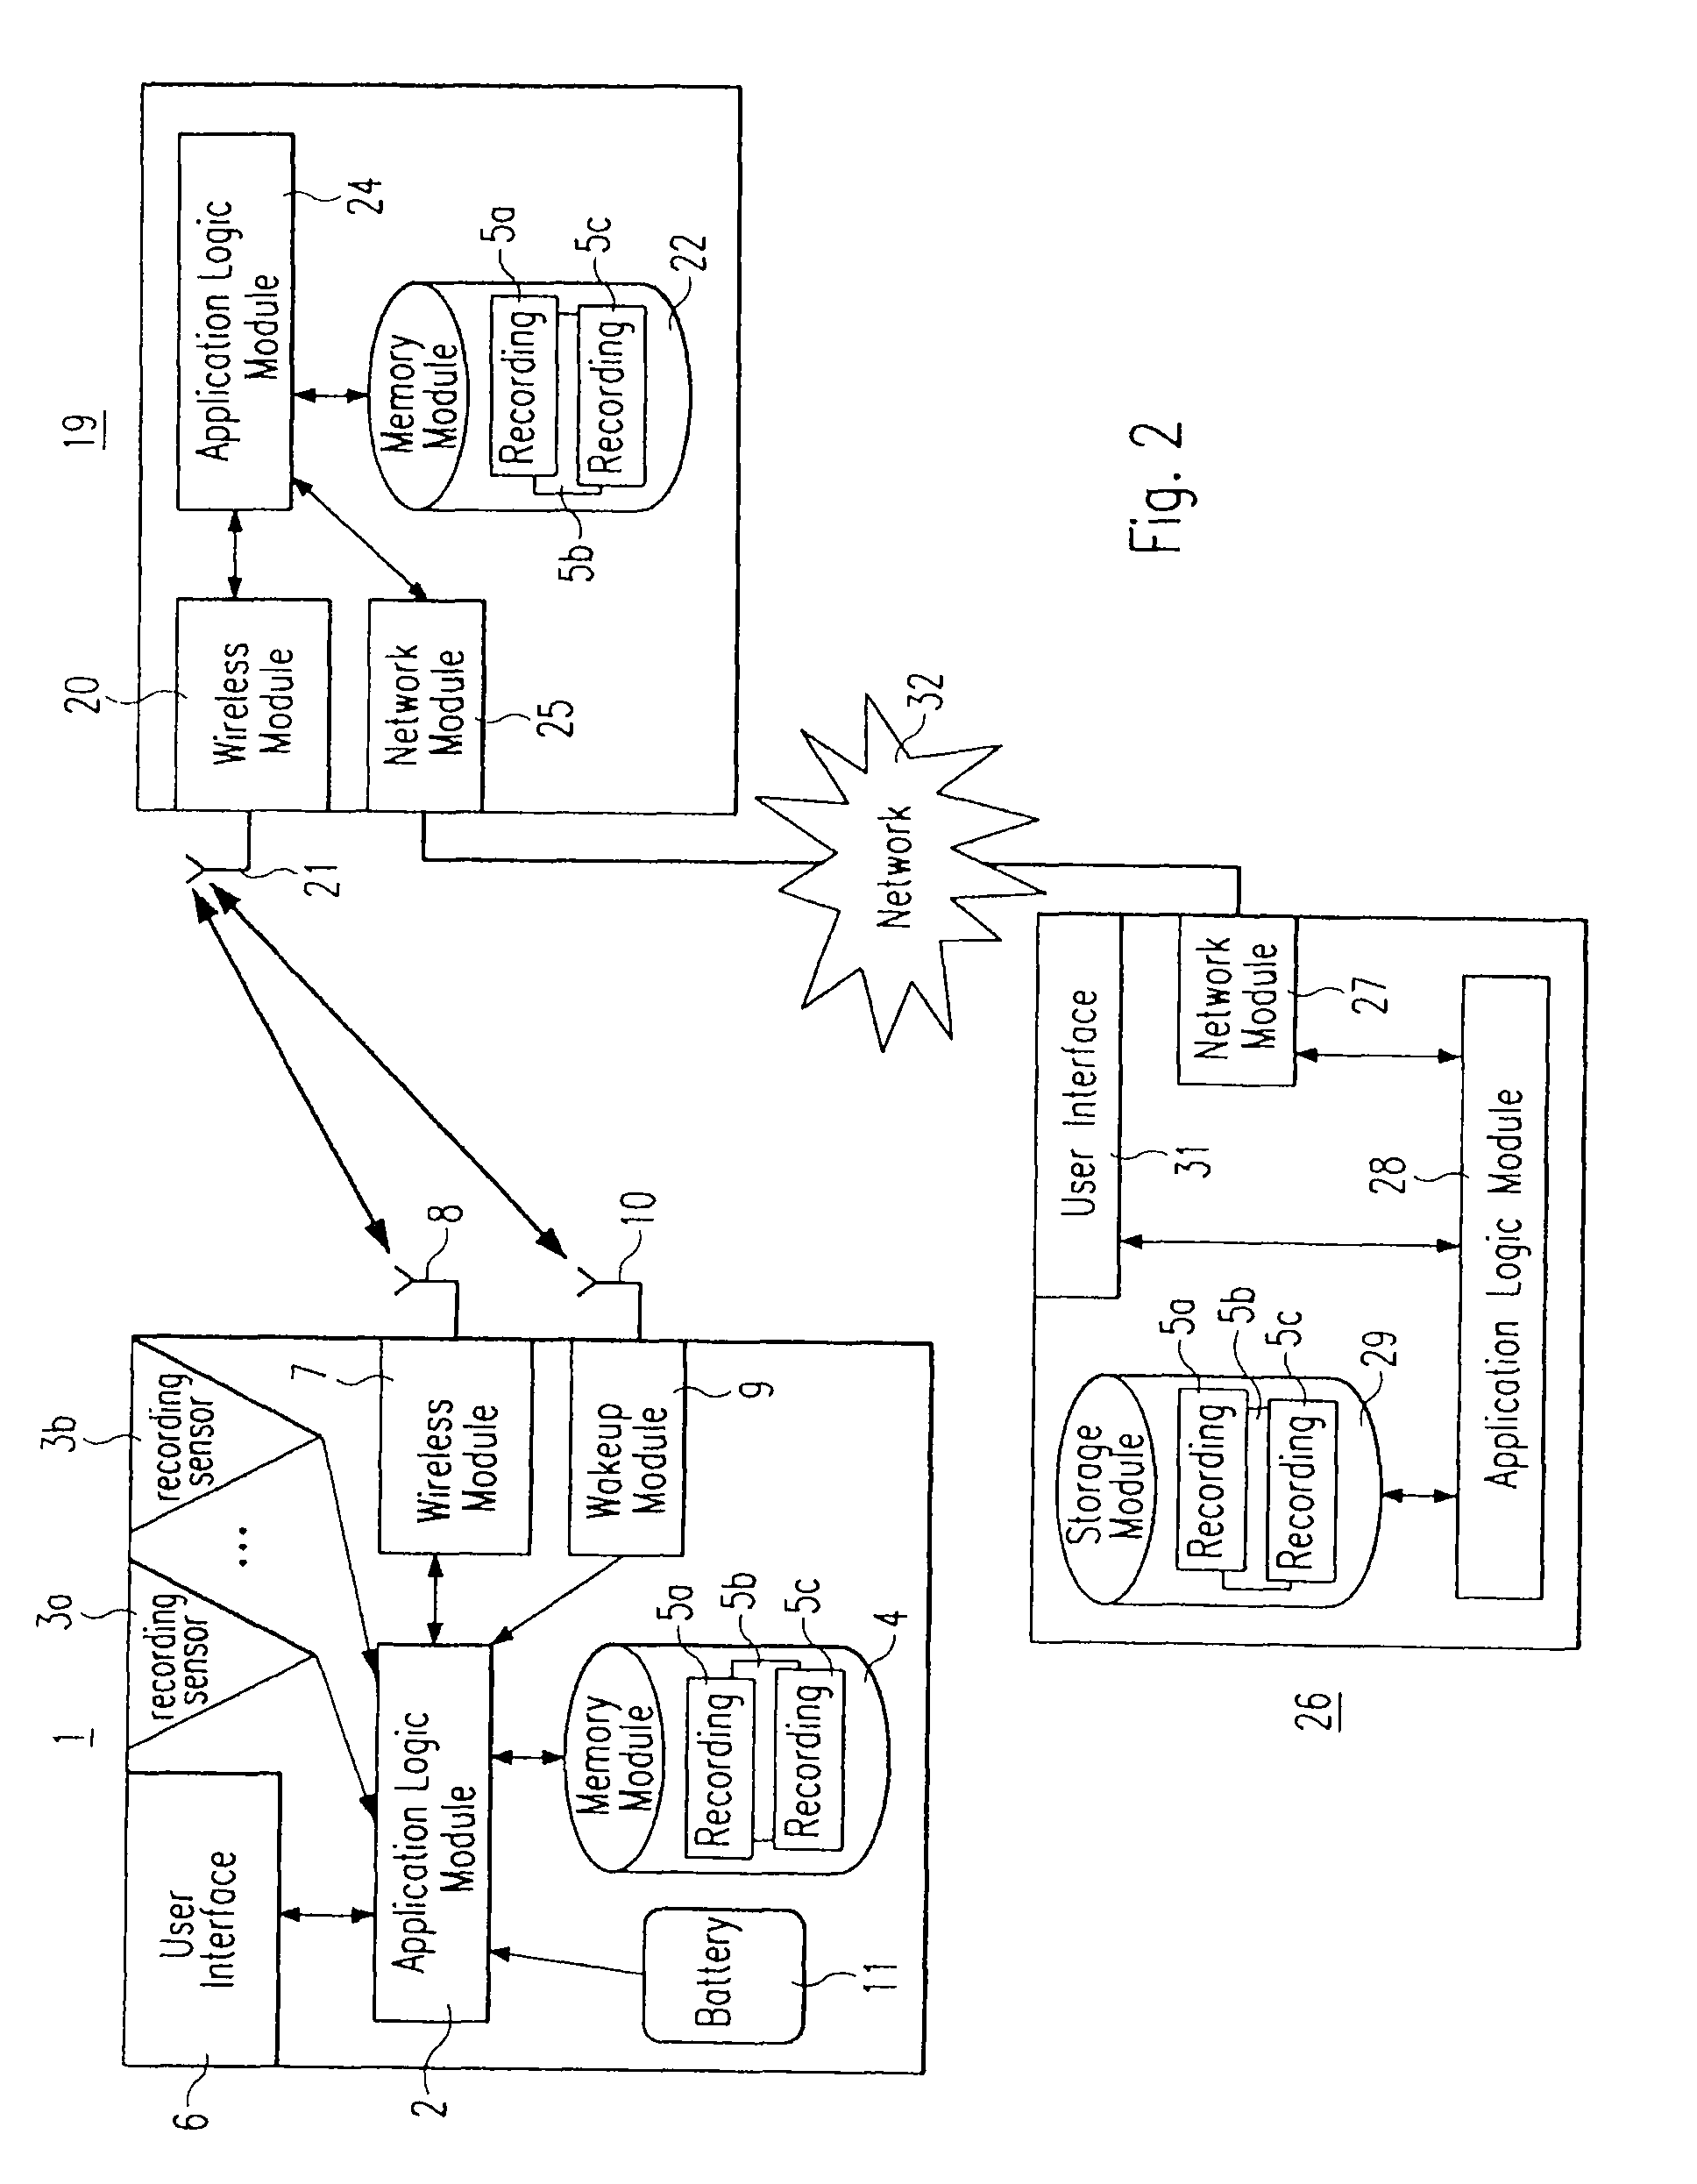 Wireless transfer of data from a mobile device to a server